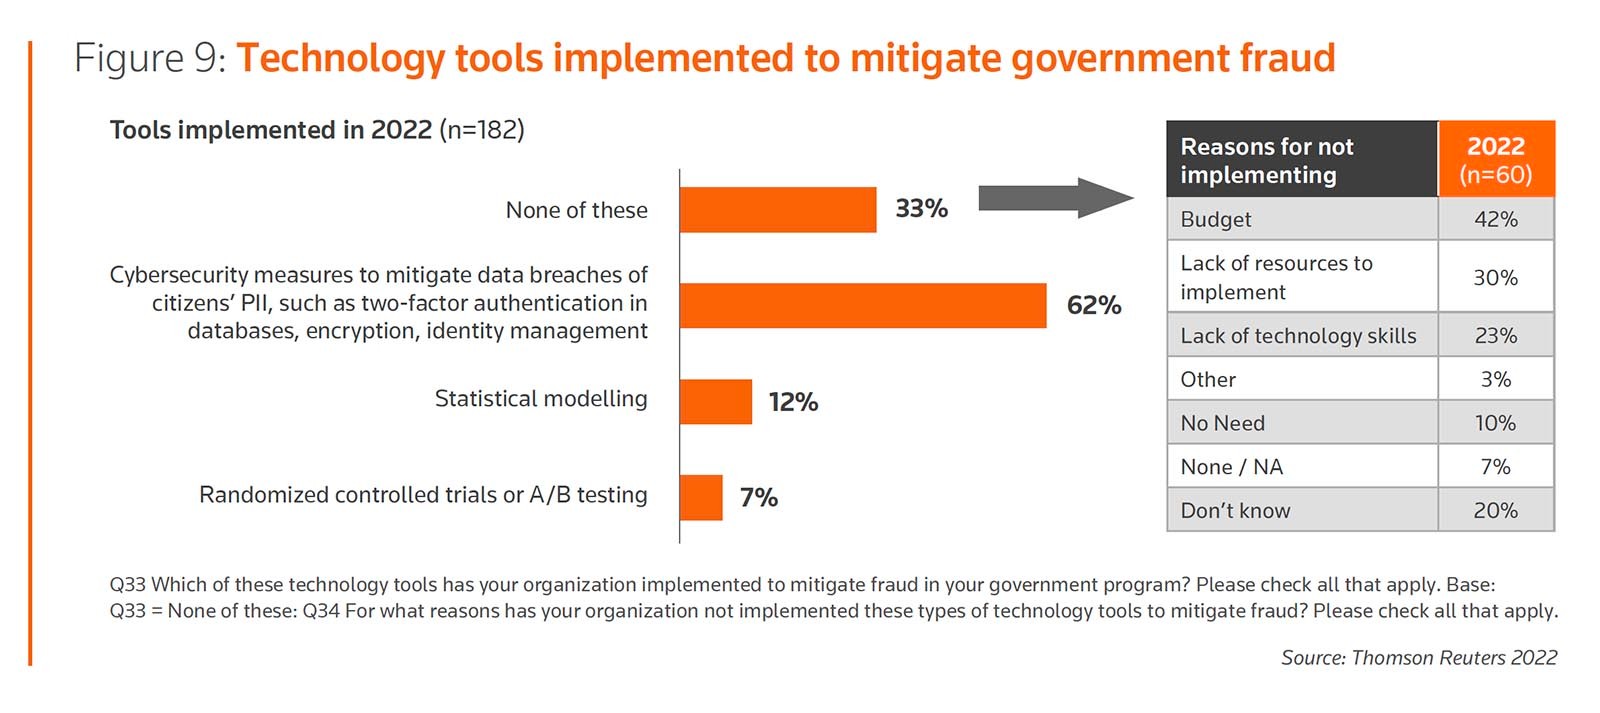 Technology tools implemented to mitigate government fraud